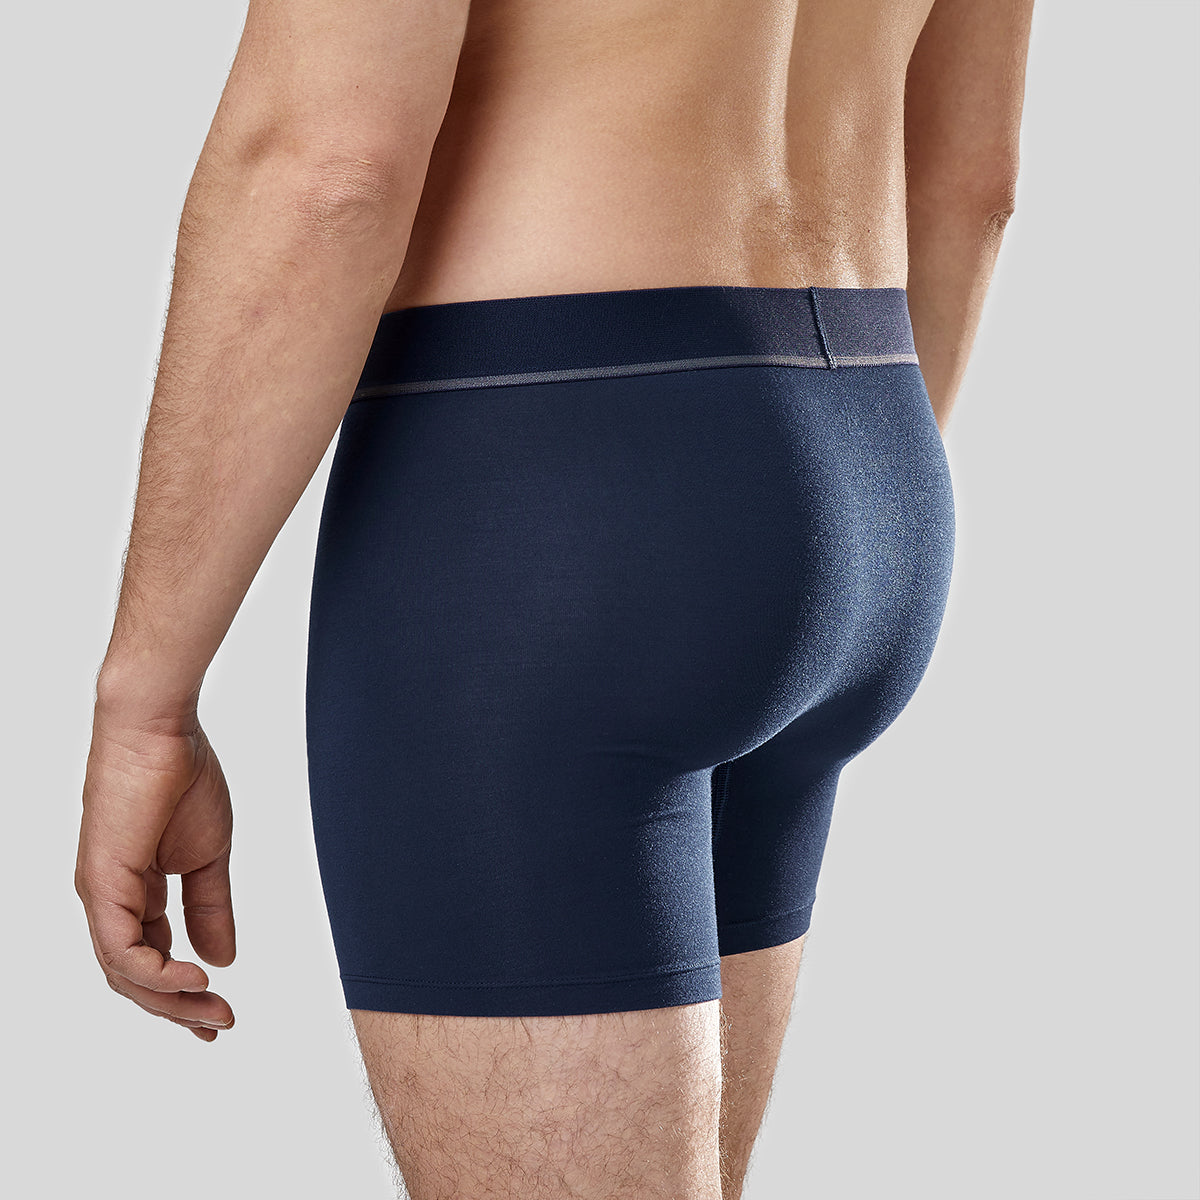 The Perfect Fit: Modal Cotton Underwear for Men in Canada